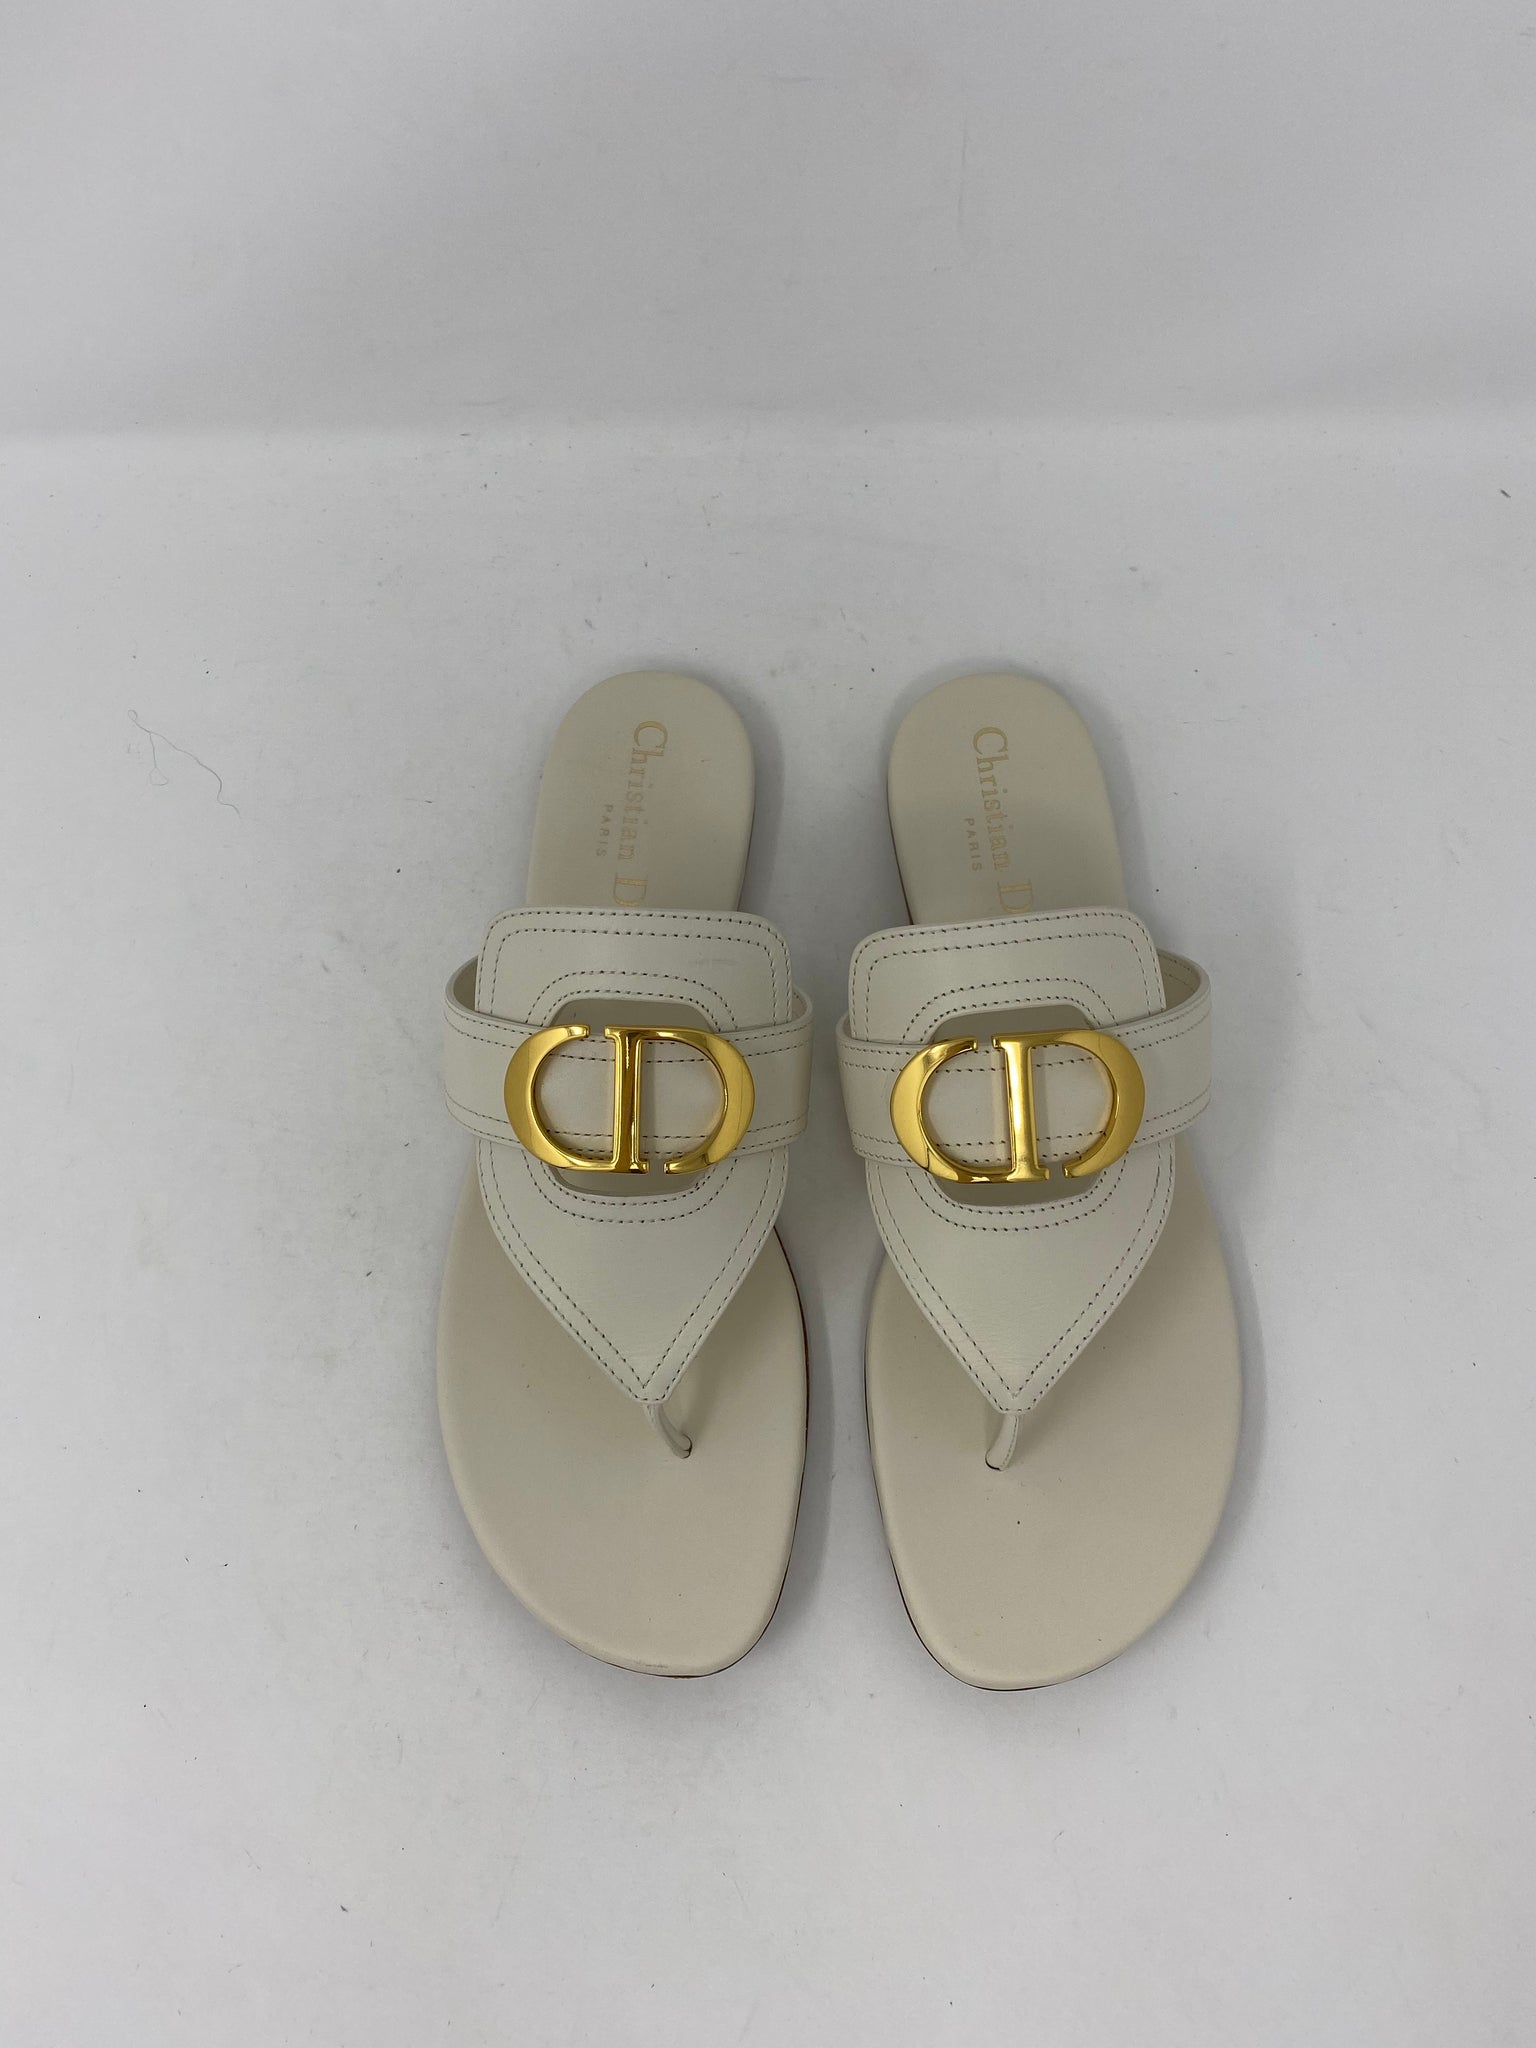 New DIOR 30 MONTAIGNE Leather Thong Flat Sandals Slides Shoes